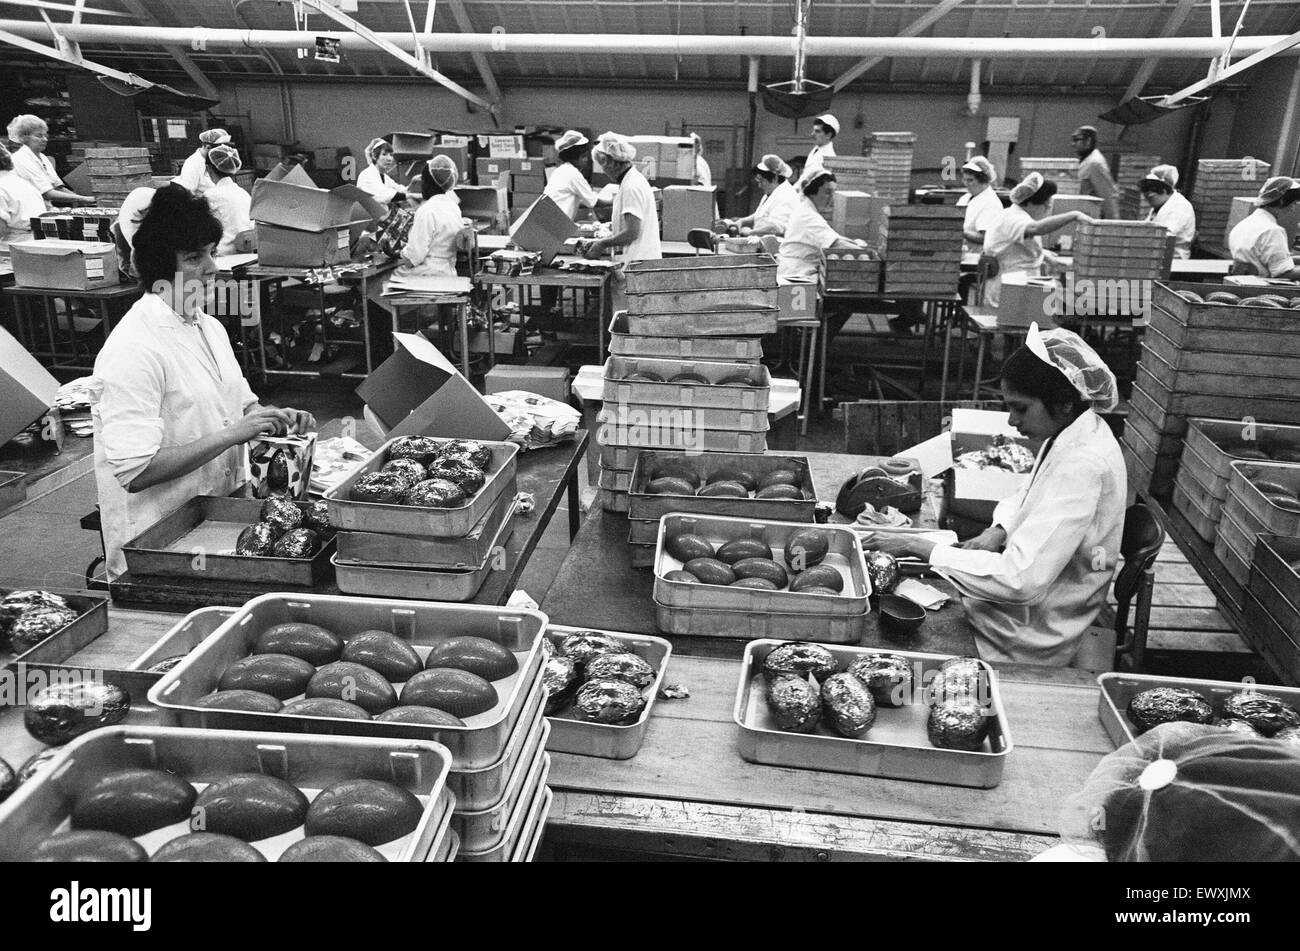 Packing on the Easter Egg production line at Cadbury's Chocolate Bournville factory. 22nd January 1970 Stock Photo